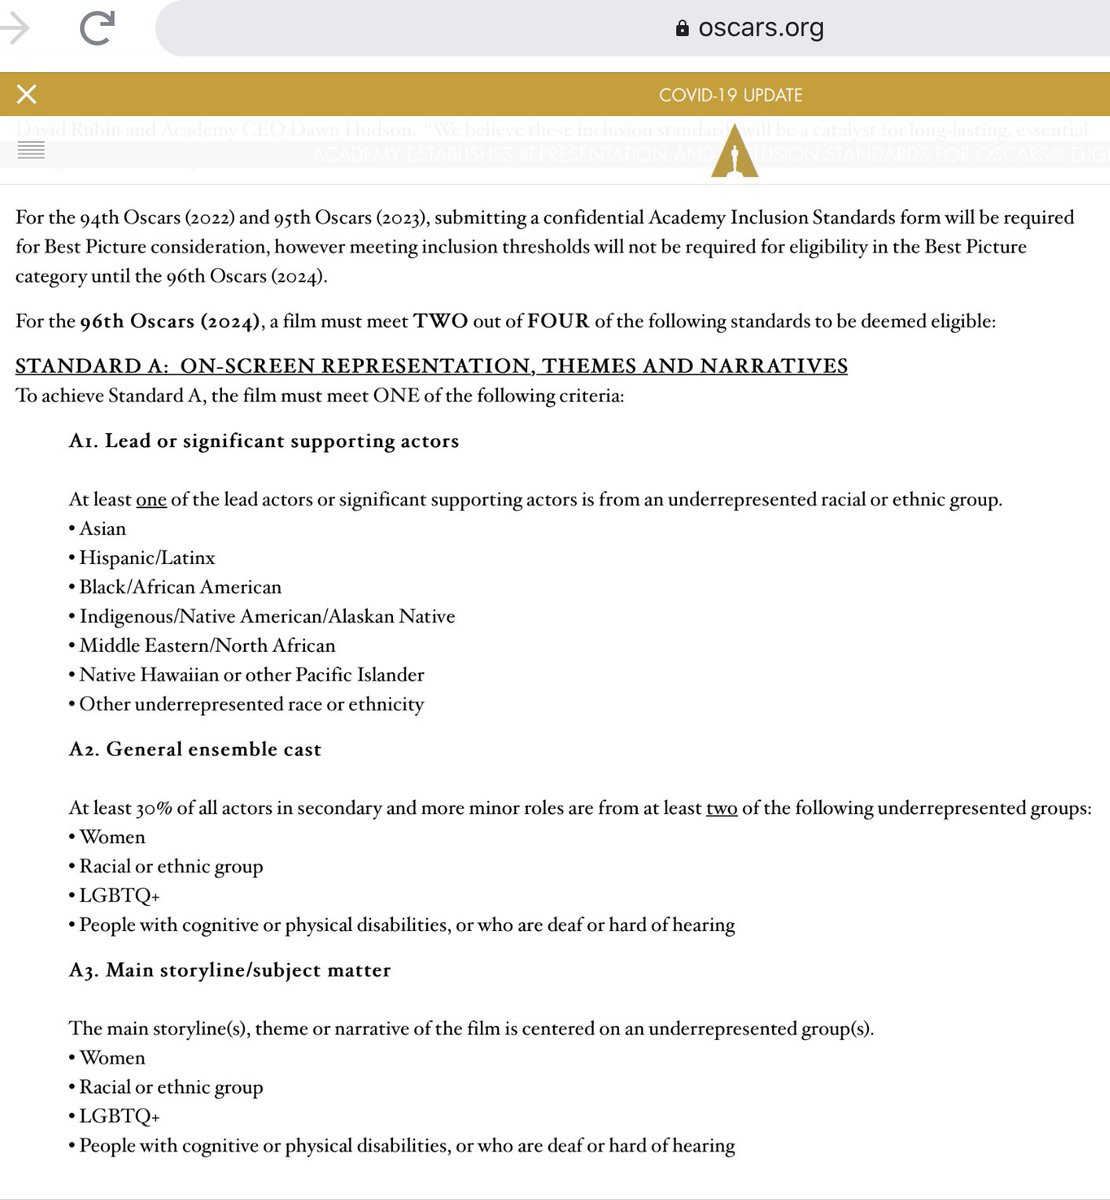 The new Oscar rules require a film meet 2 of 4 representational categories, the first of which is minority characters/actors. You can comply with 2 of the 3 other categories involving distribution/marketing but requiring white writers to write white-only films violates the spirit